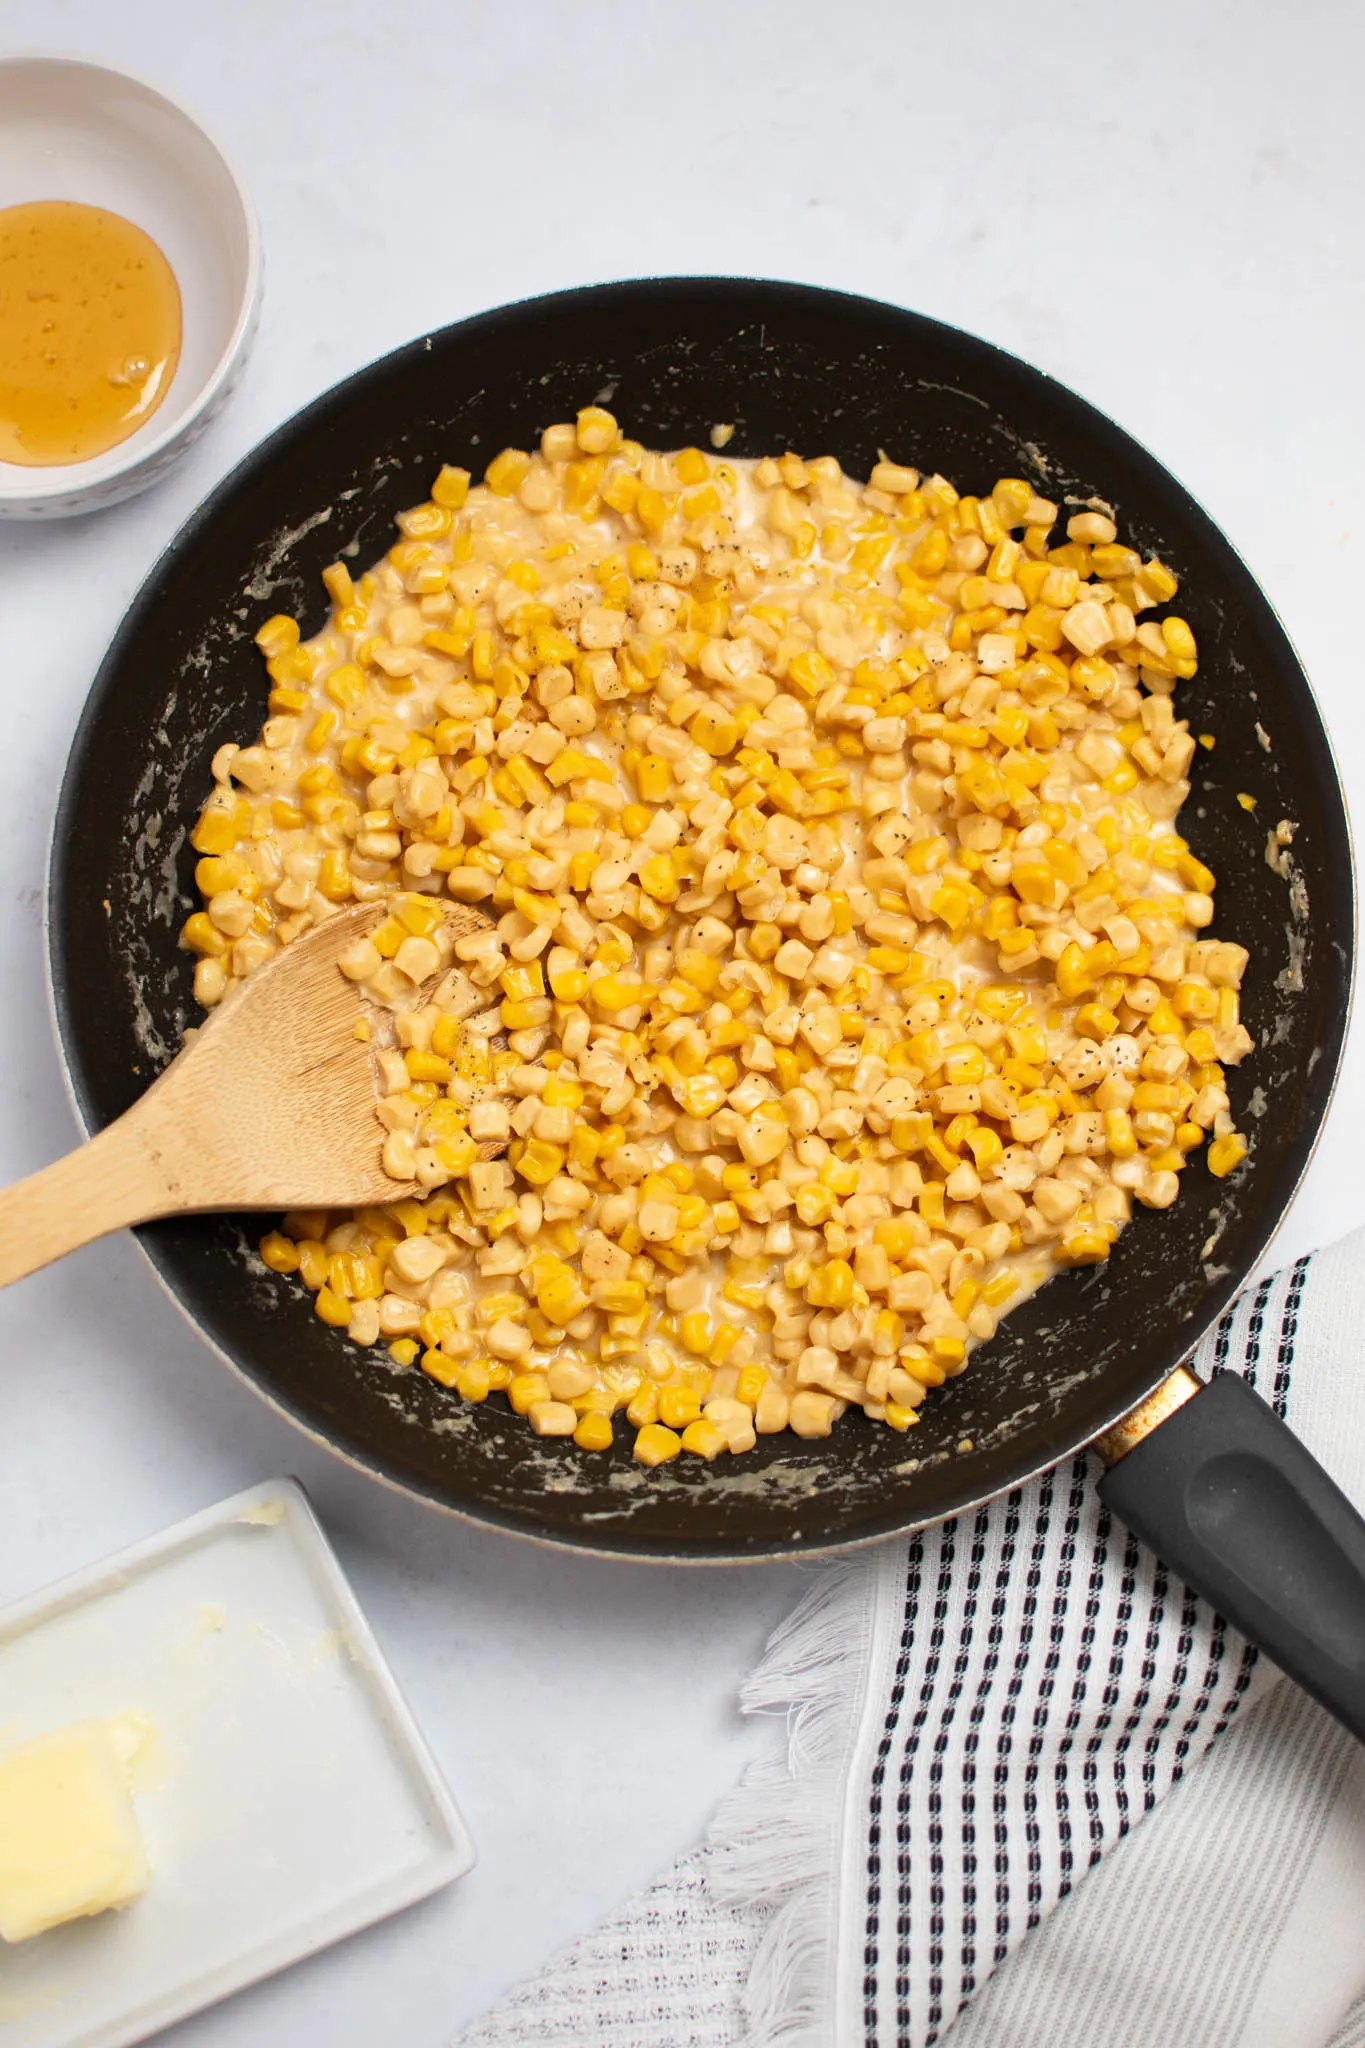 Black frying pan full of skillet fried corn with bowl of honey and butter dish nearby.